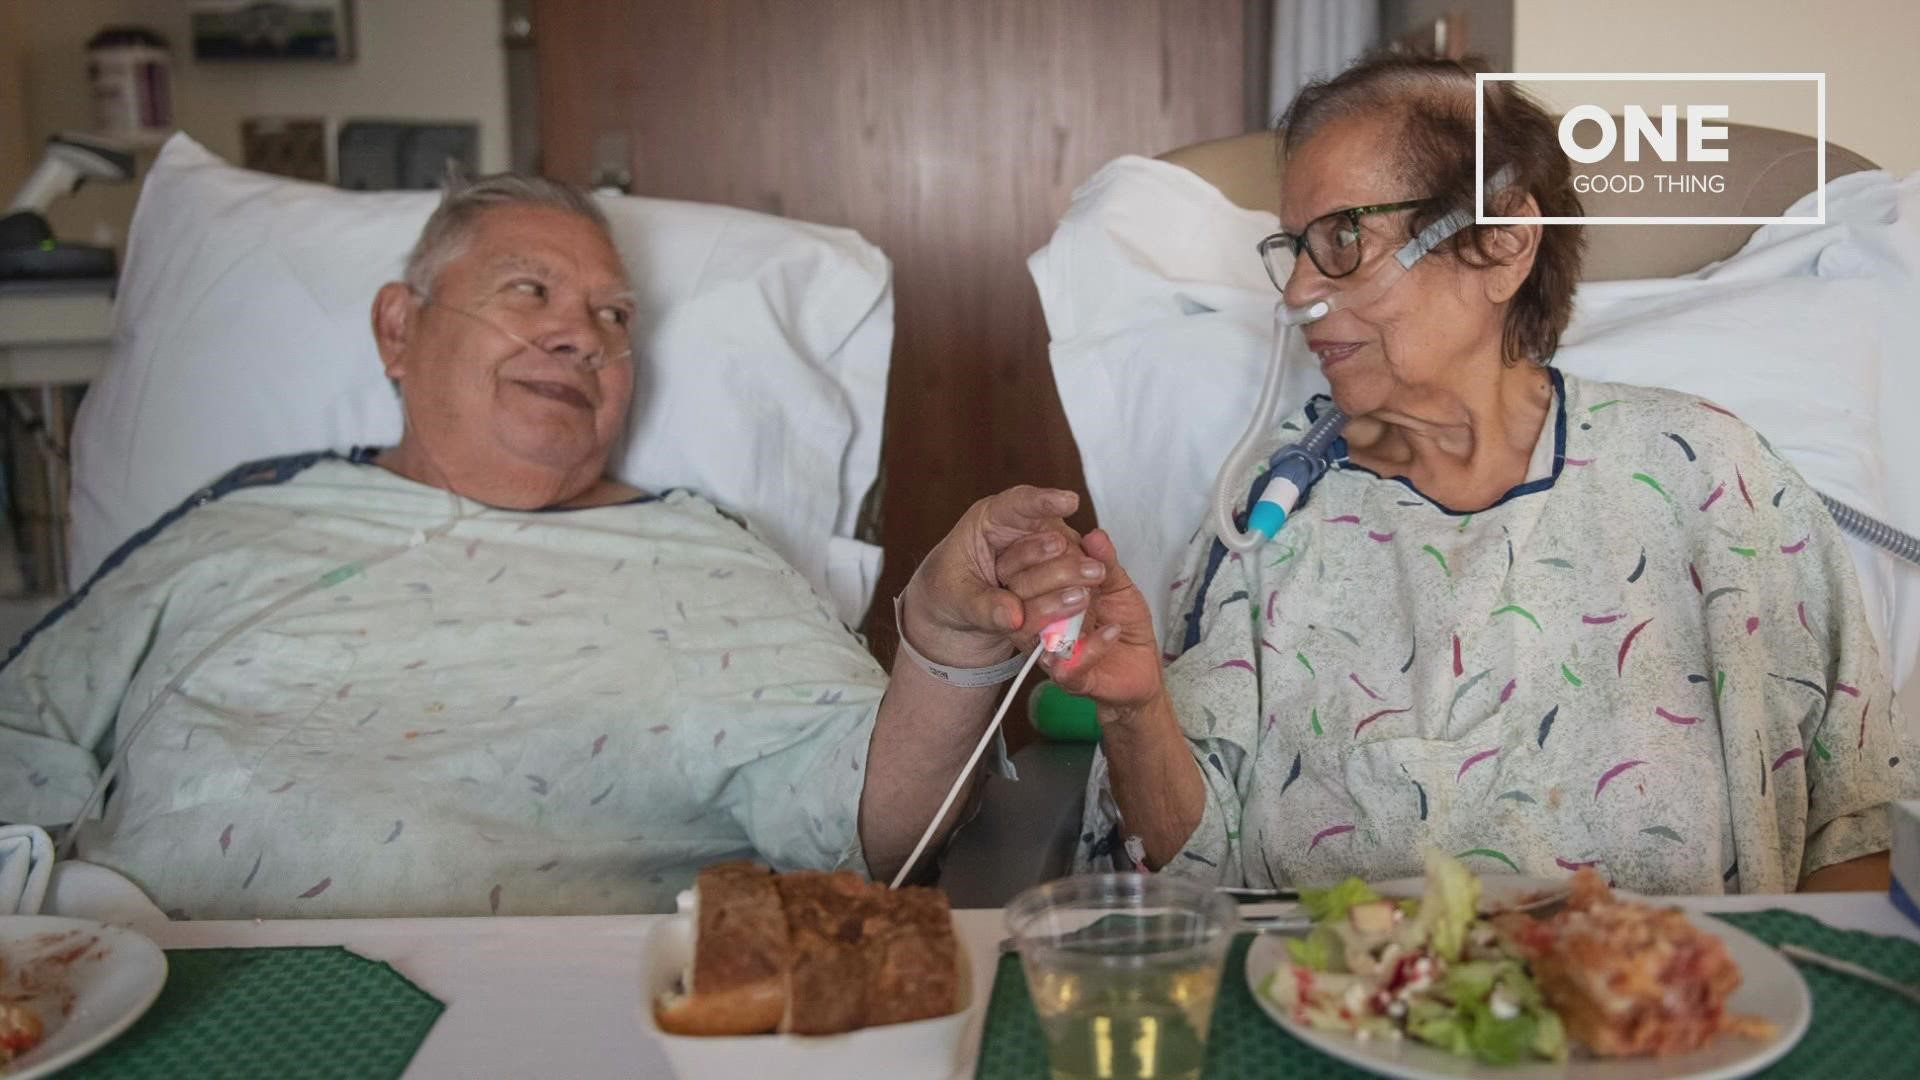 A couple is able to celebrate their 60th anniversary despite being hospitalized with COVID-19.